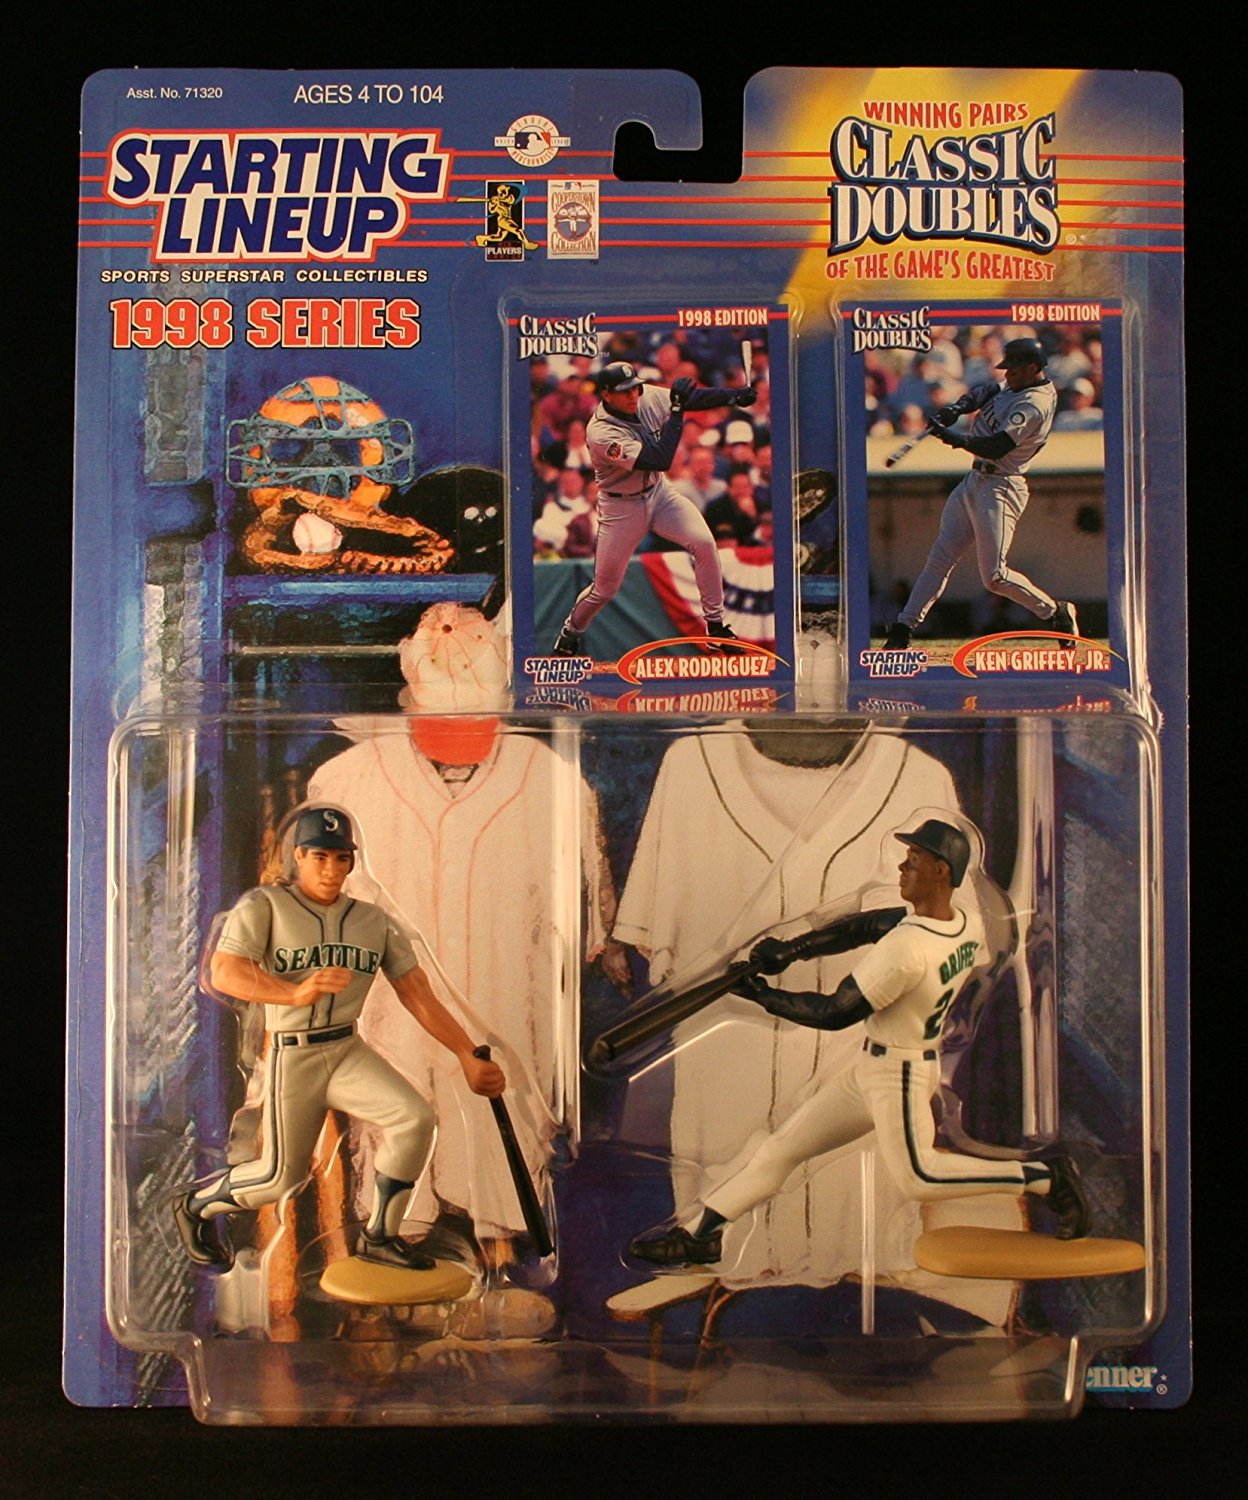 ALEX RODRIGUEZ / SEATTLE MARINERS & KEN GRIFFEY JR. / SEATTLE MARINERS 1998 MLB Classic Doubles * Winning Pairs Series * Starting Lineup Action Figures & Exclusive Collector Trading Cards